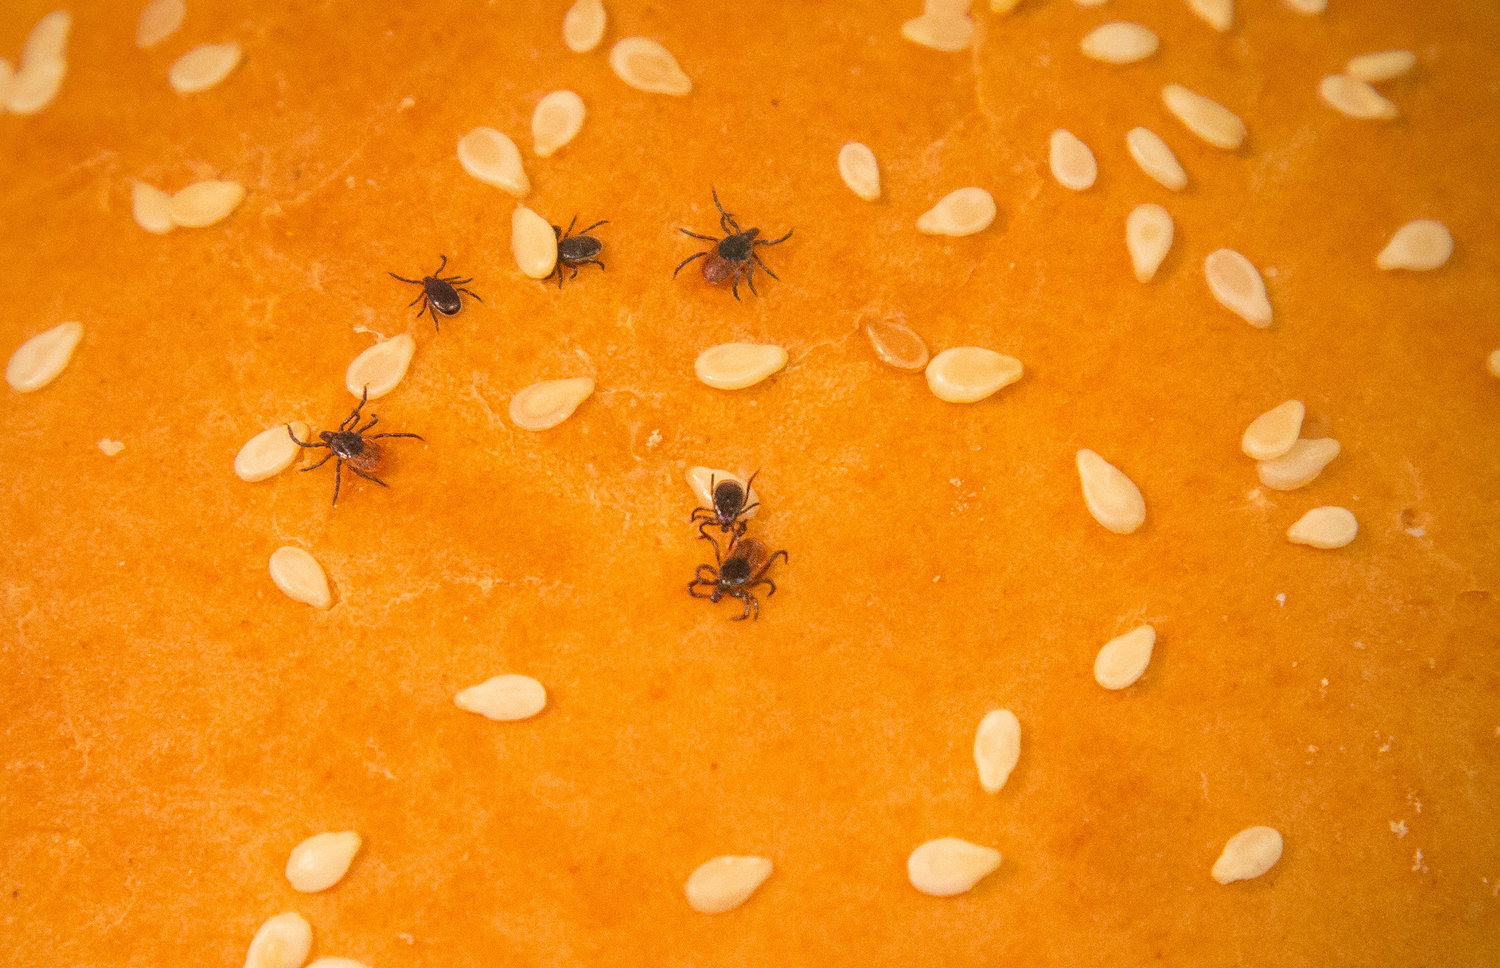 Ticks on a bun. These male and female adult blacklegged ticks, hanging out on a sesame seed bun, demonstrate their size relative to the seeds.